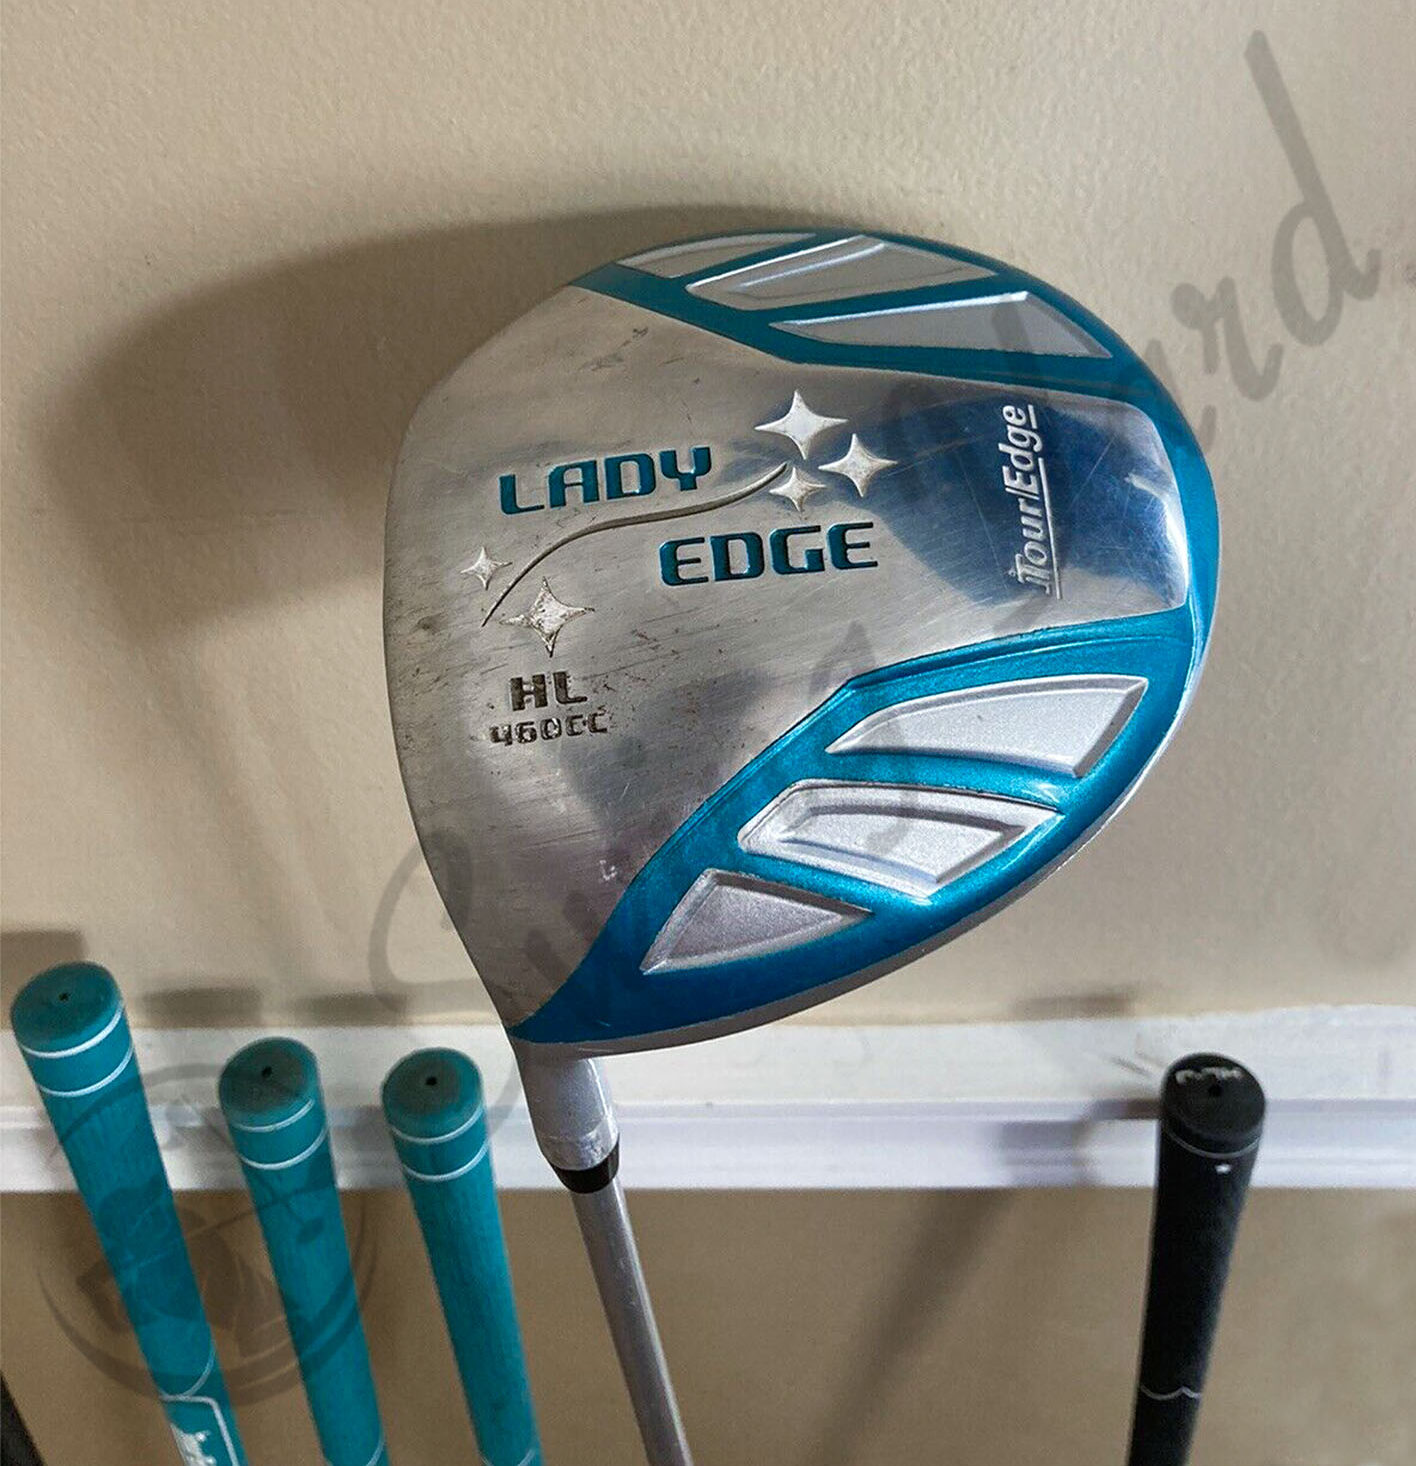 A Tour Edge Lady Edge driver for testing in my living room